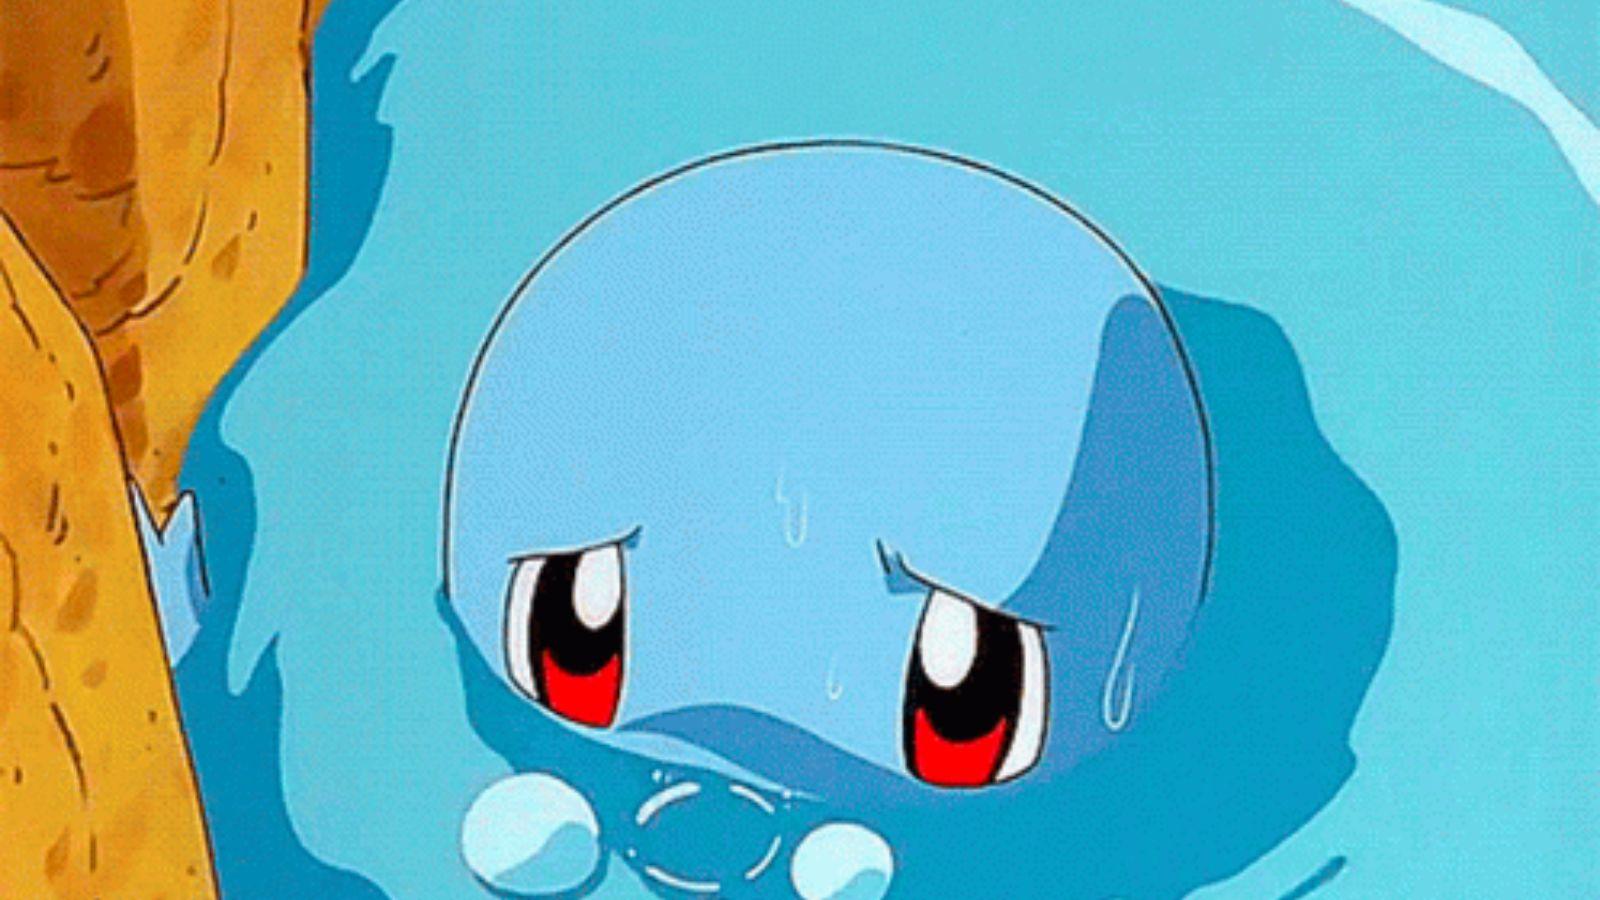 Pokemon Squirtle is sad about Pokemon Go issues